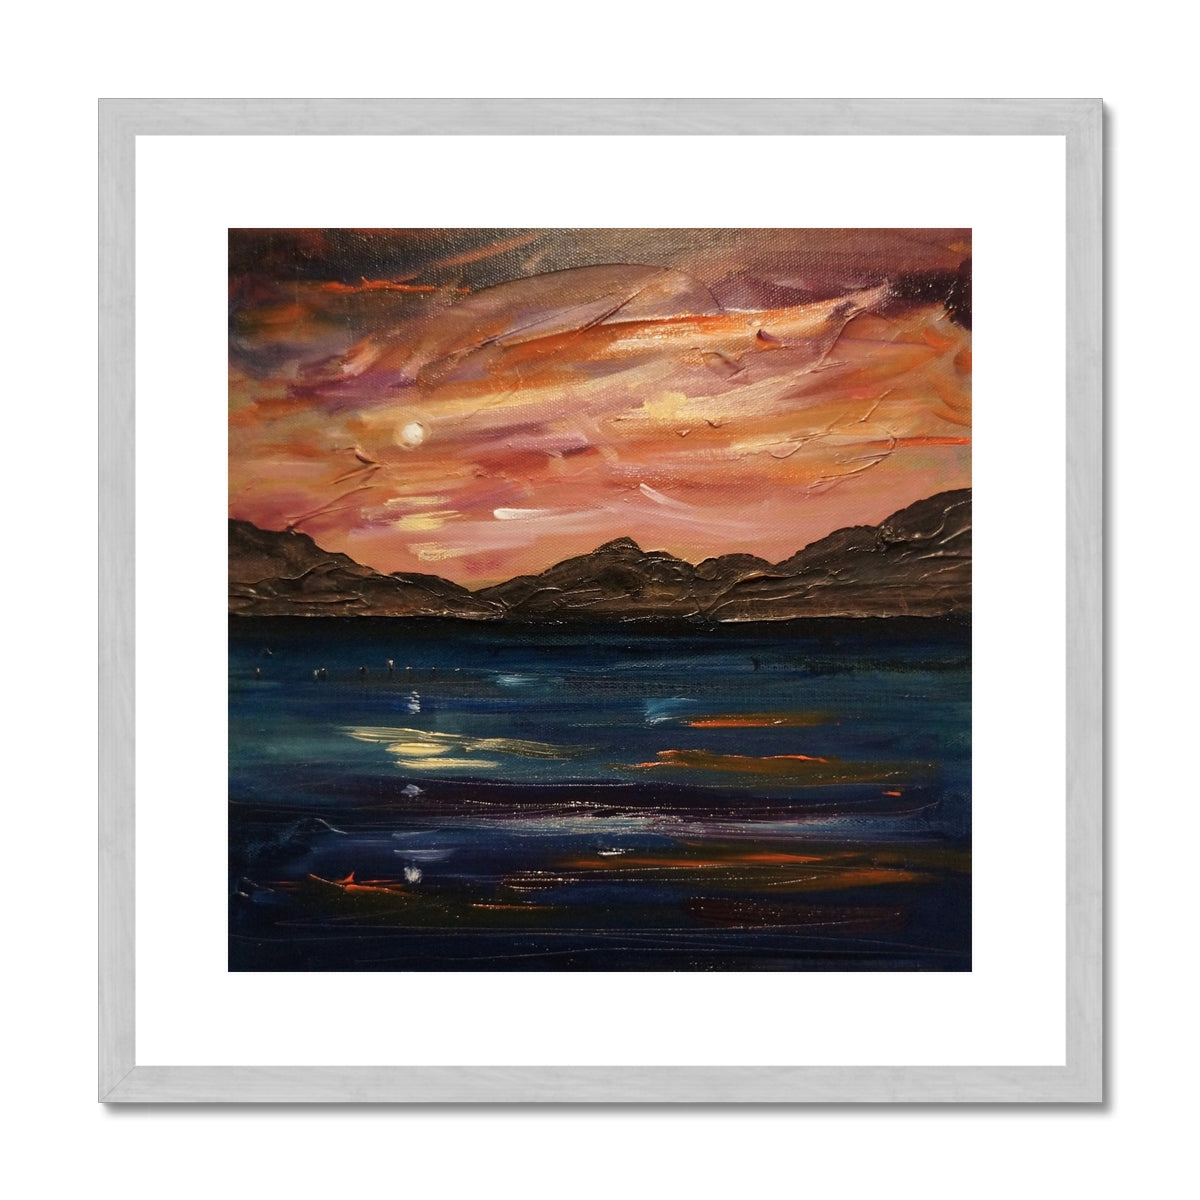 Loch Ness Moonset Painting | Antique Framed & Mounted Prints From Scotland-Antique Framed & Mounted Prints-Scottish Lochs & Mountains Art Gallery-20"x20"-Silver Frame-Paintings, Prints, Homeware, Art Gifts From Scotland By Scottish Artist Kevin Hunter